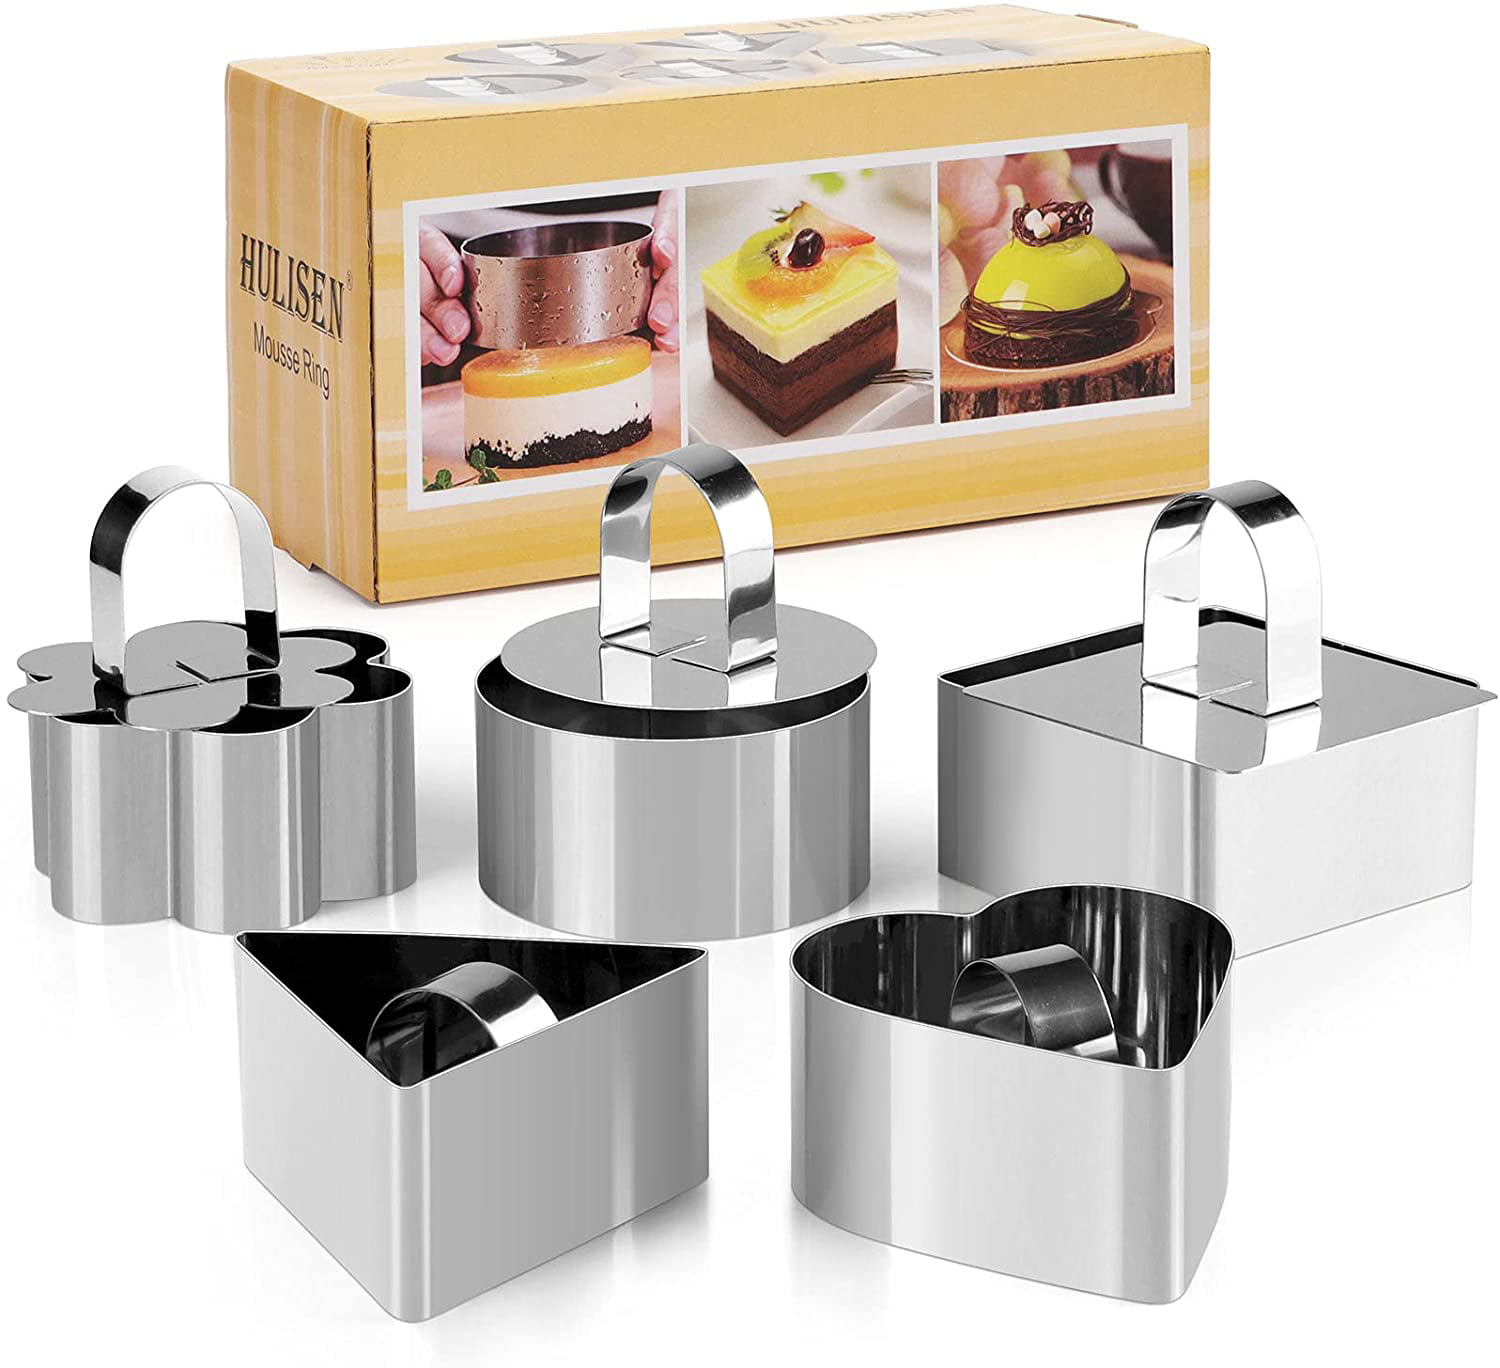 Cooking Cake Ring Baking Forms with Square Stainless Steel 8 Inch for Pastry Food with Smooth Surface 